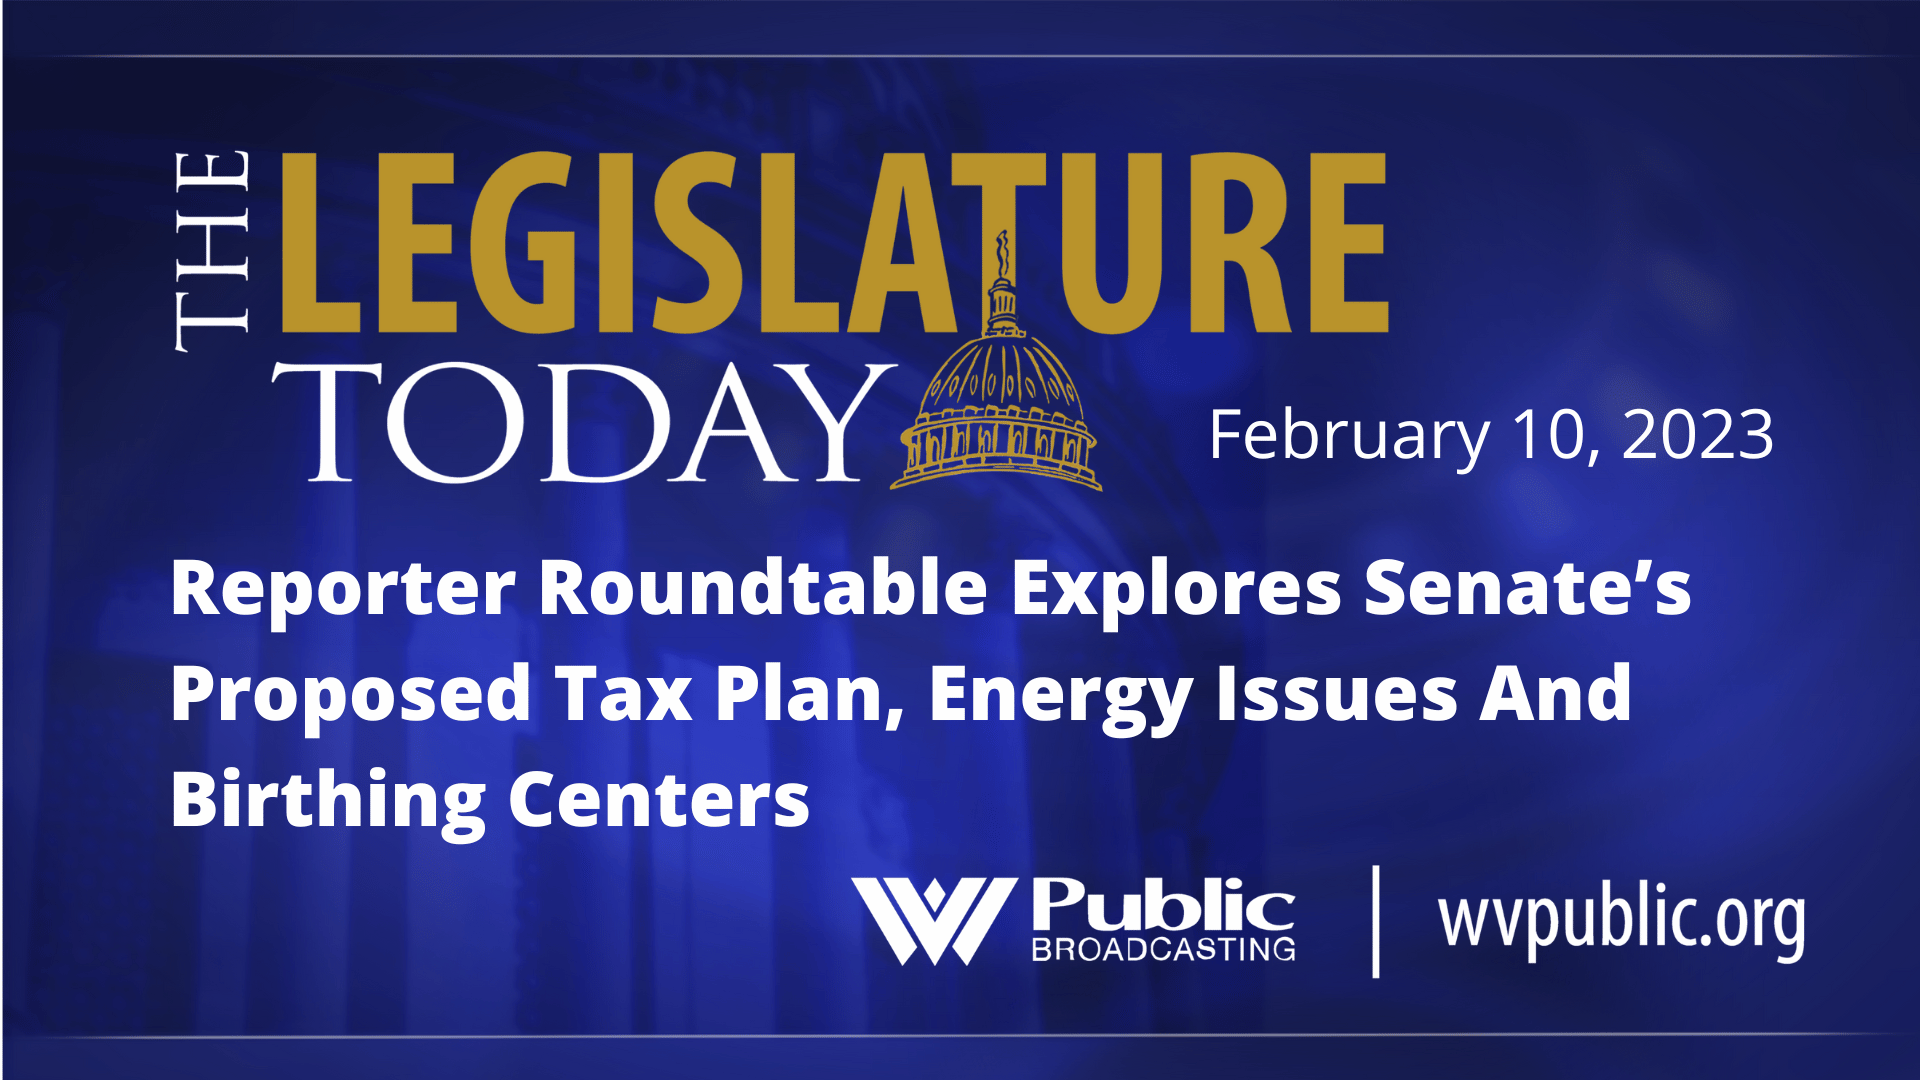 Reporter Roundtable Explores Senate’s Proposed Tax Plan, Energy Issues And Birthing Centers